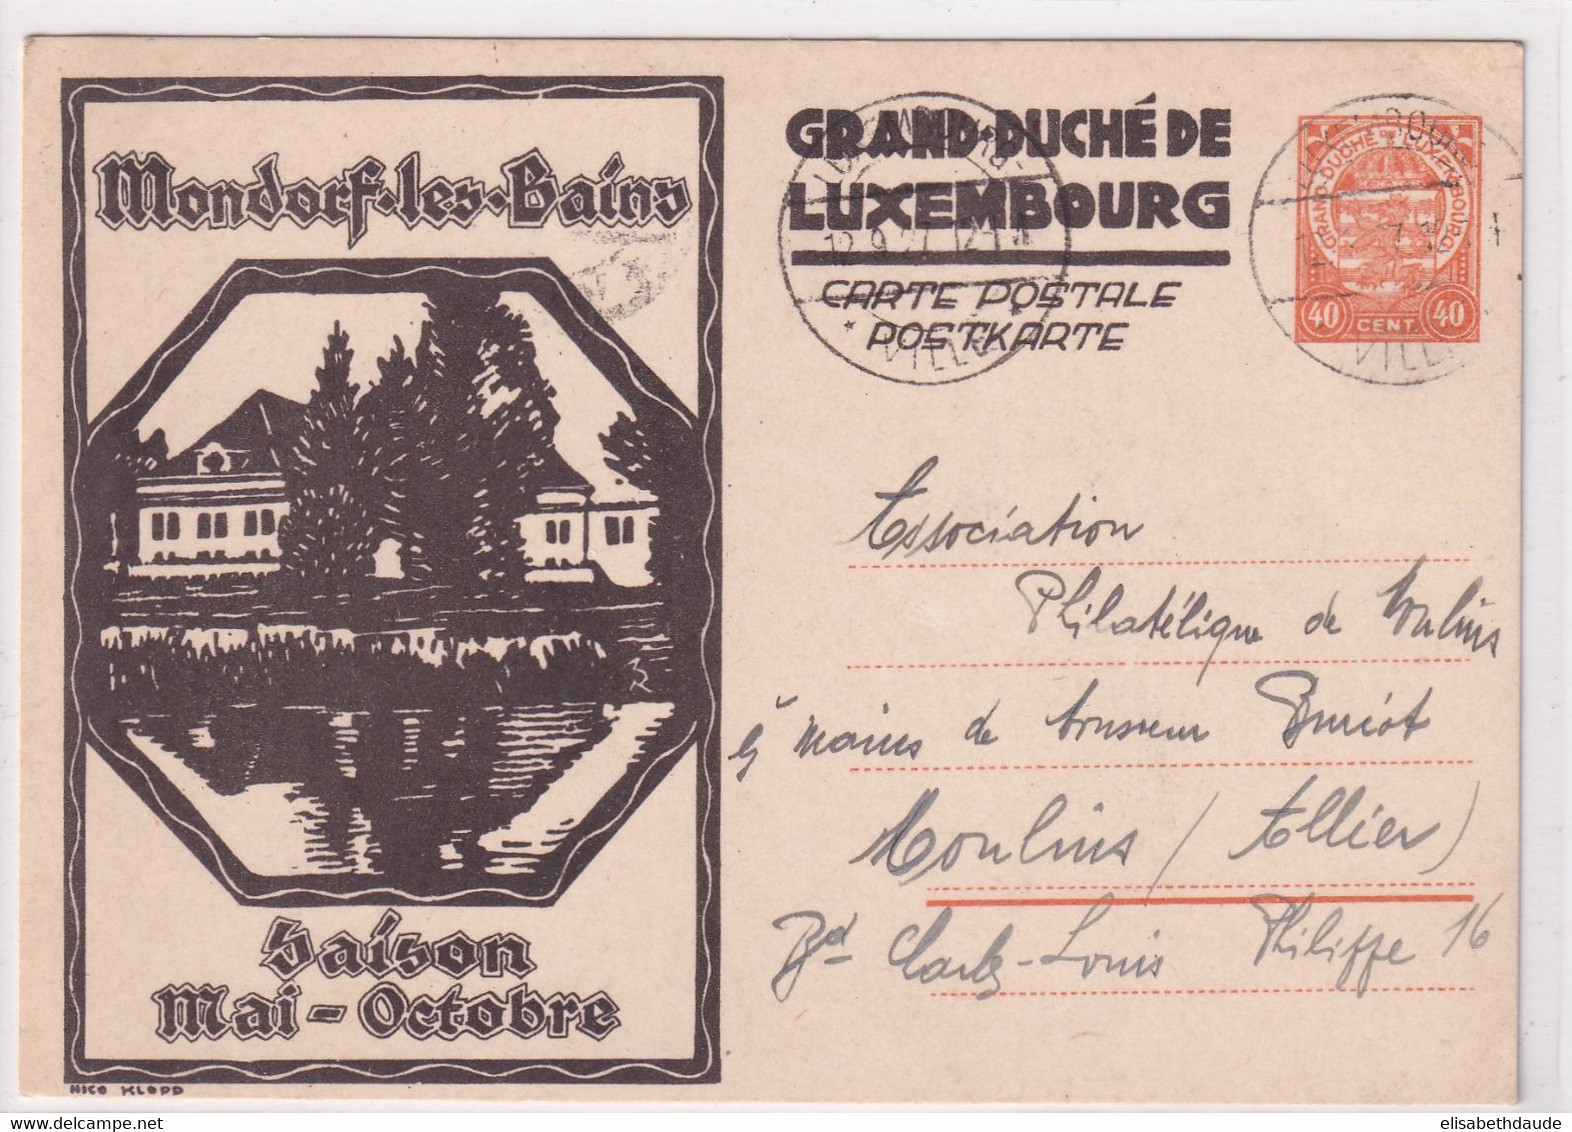 LUXEMBOURG - 1927 - CP ENTIER ILLUSTREE (MONDORF LES BAINS)  => MOULINS (ALLIER) - Stamped Stationery